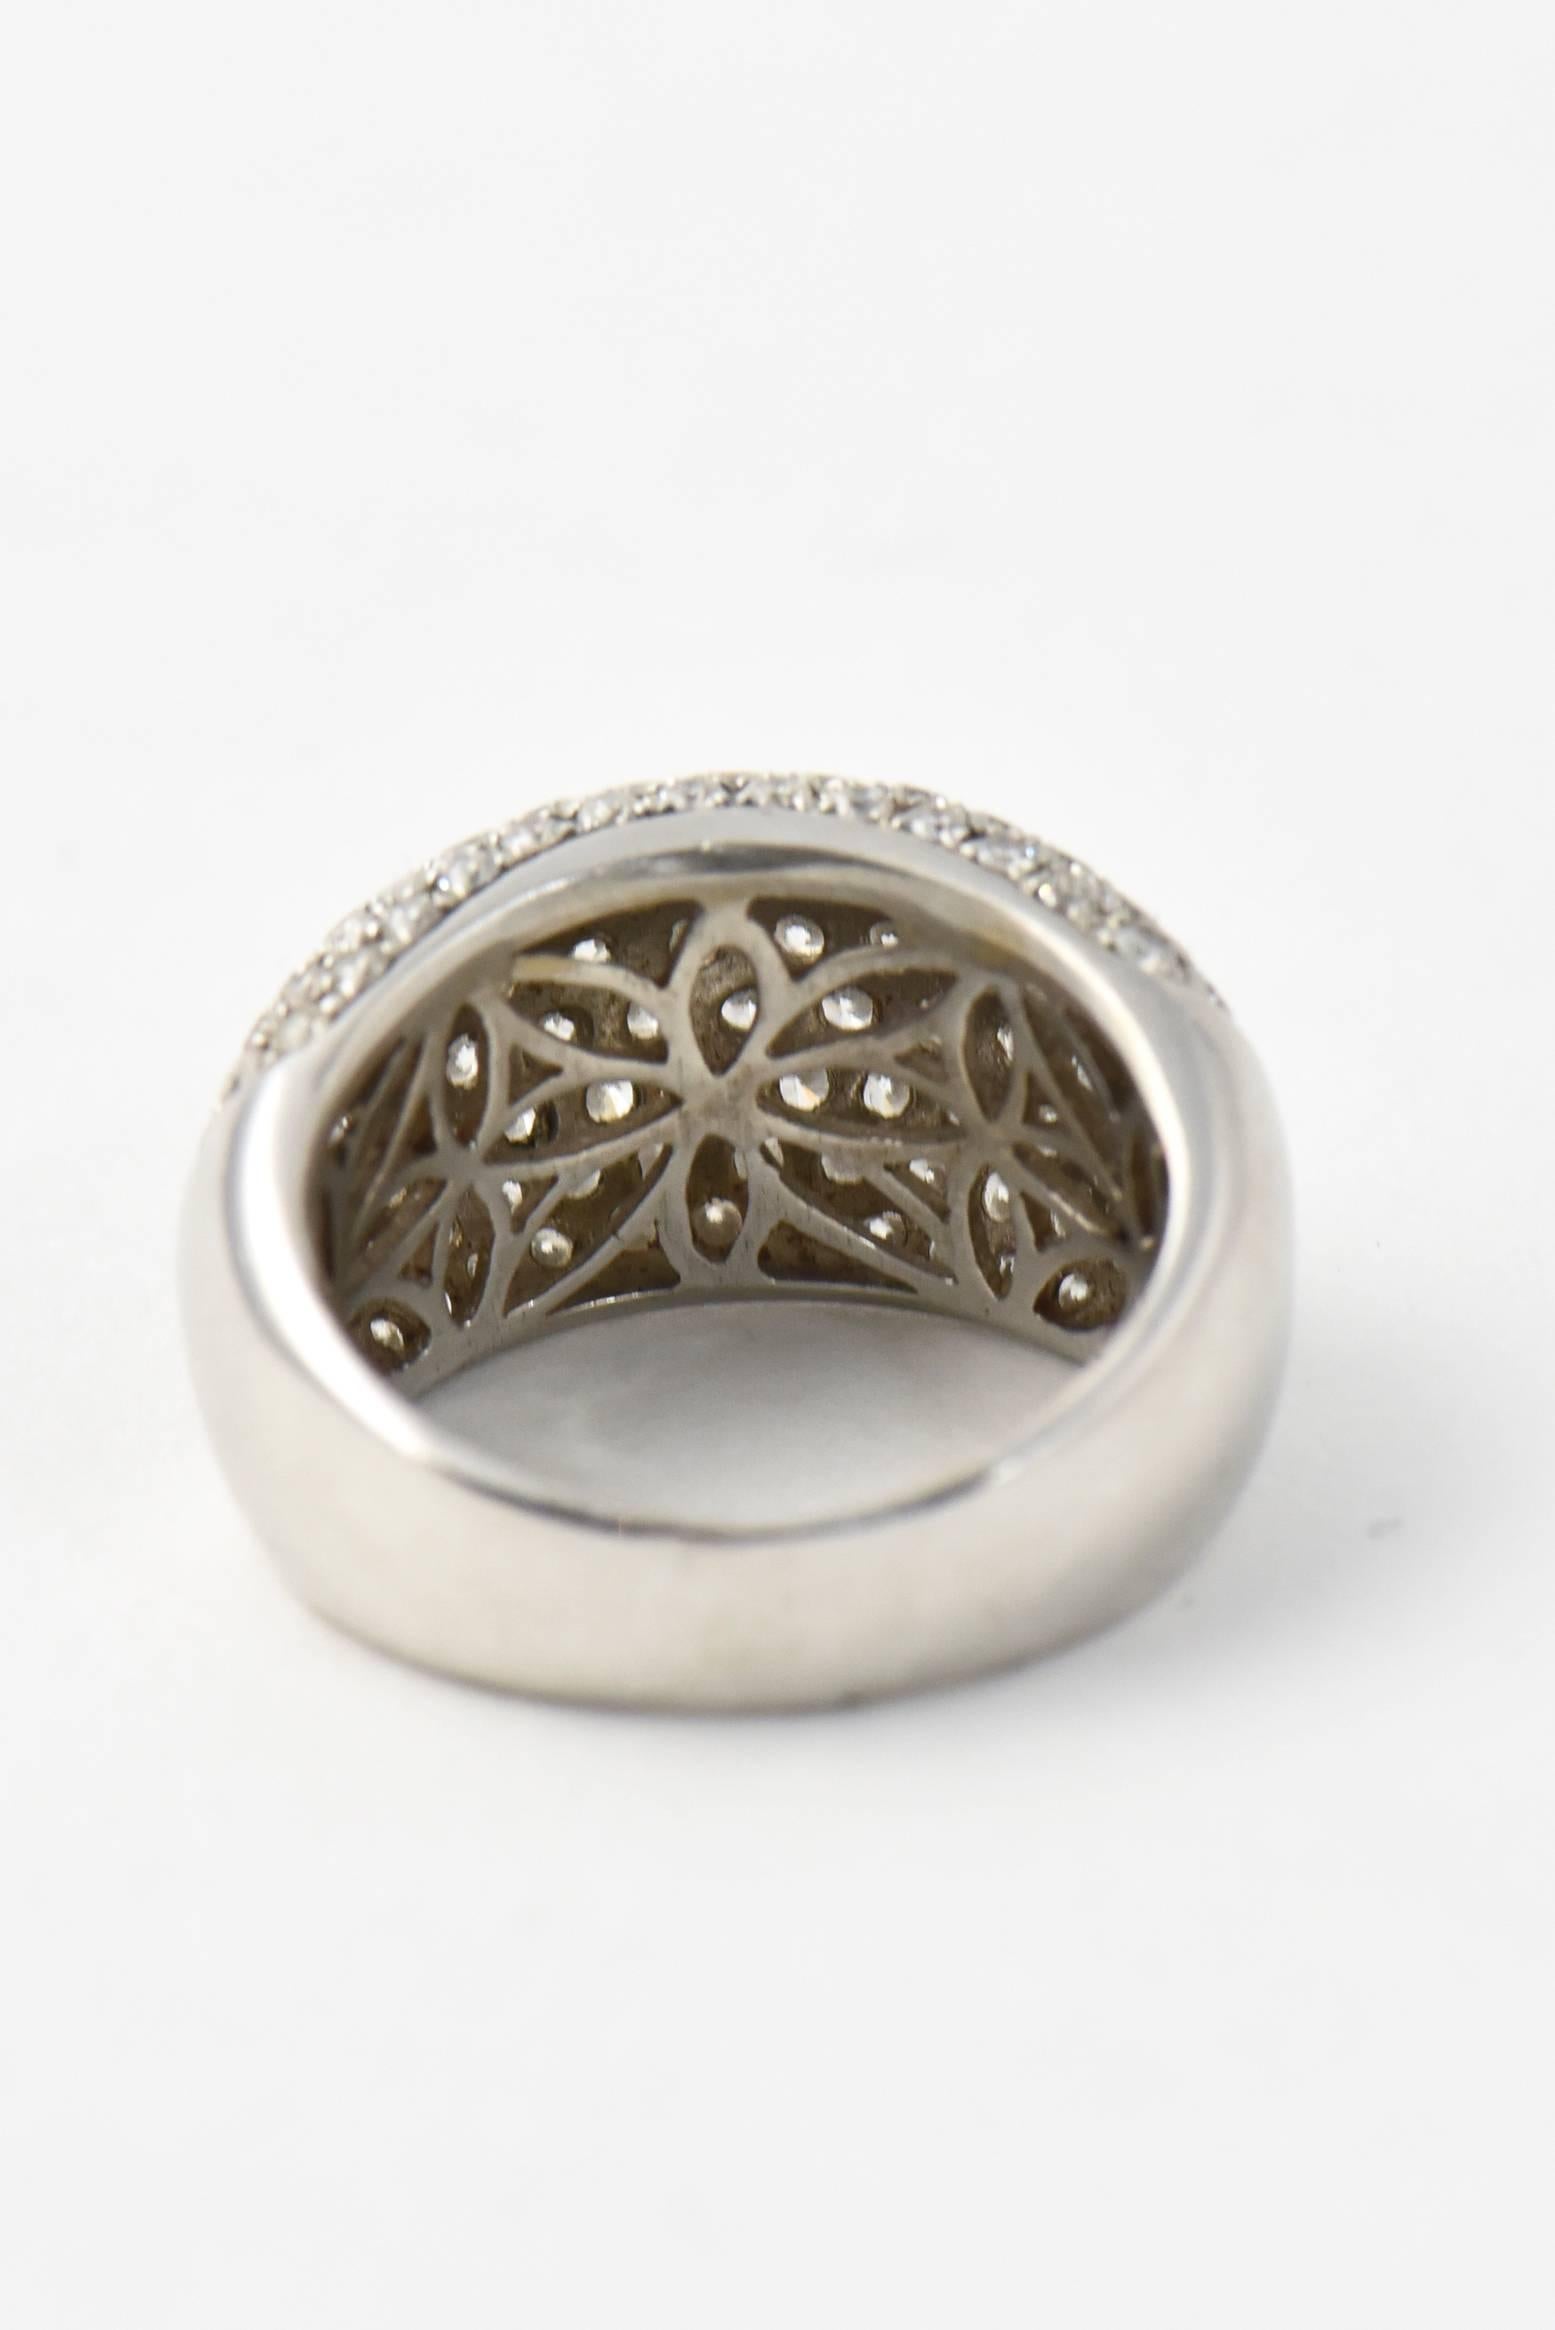 Round Cut Pave Diamond White Gold Bombe Cocktail Ring